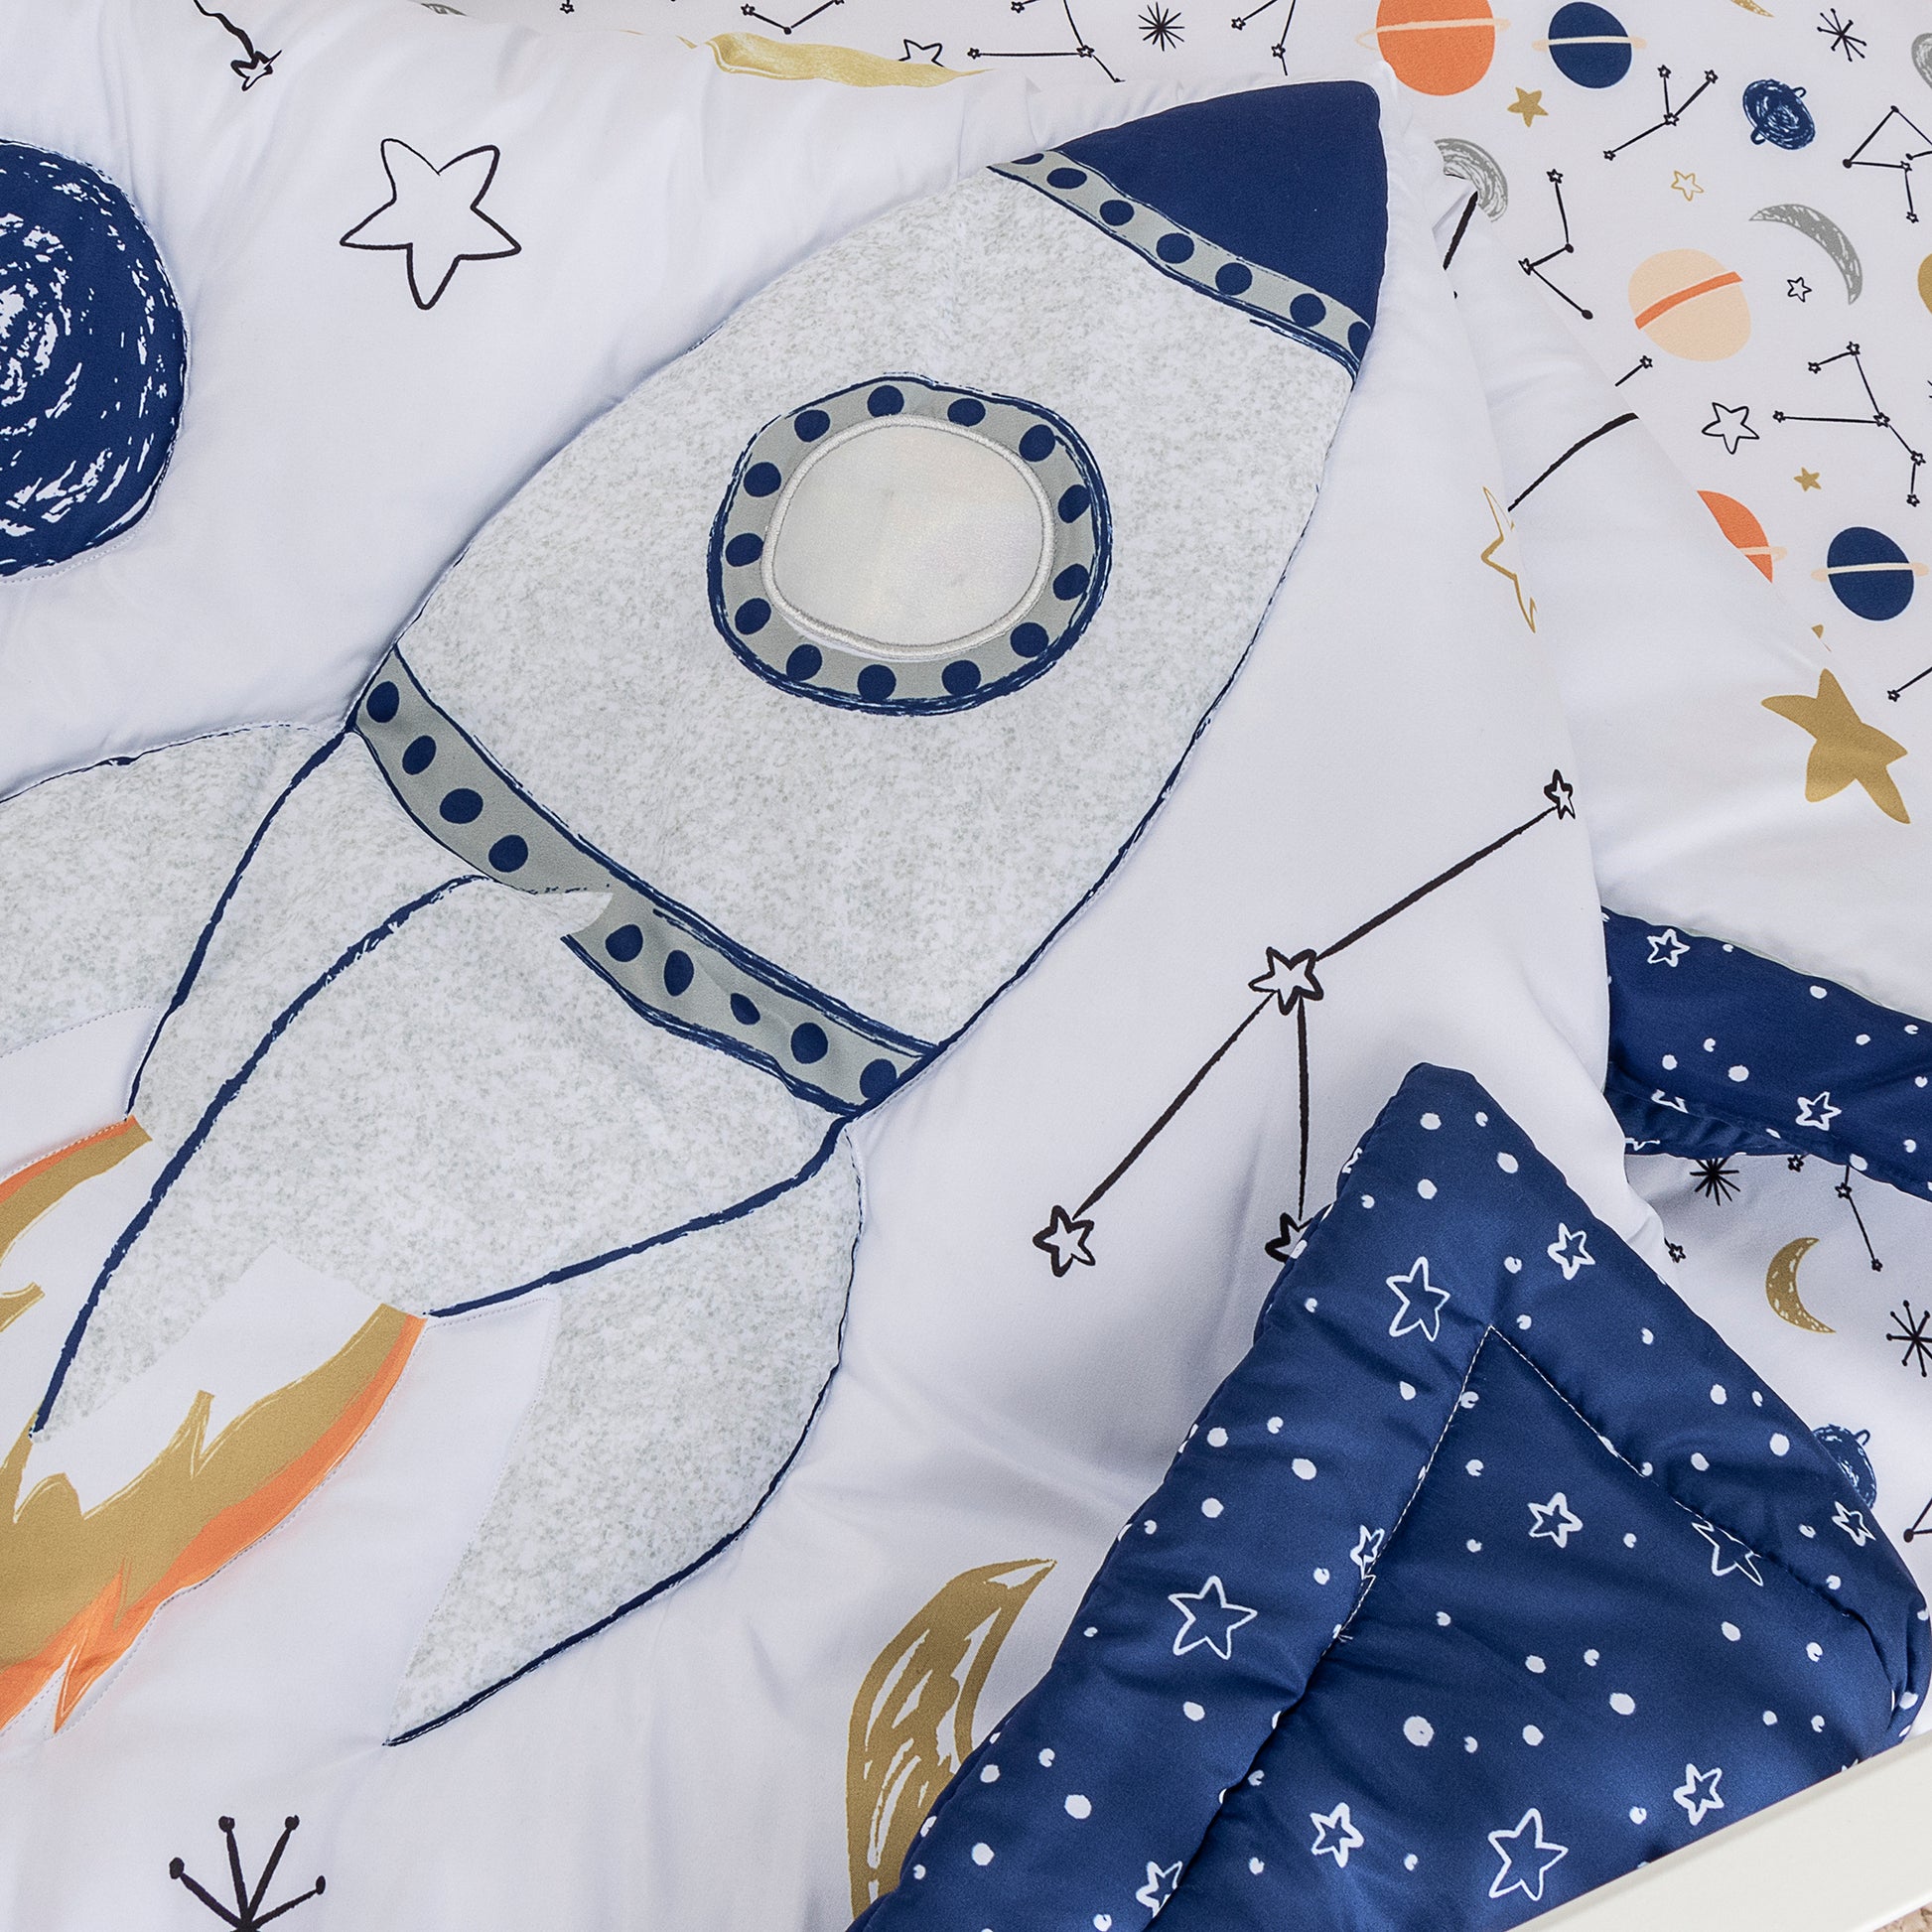 Cosmic Rocket 4 Piece Crib Bedding- Crib Quilt stylized details with rocket